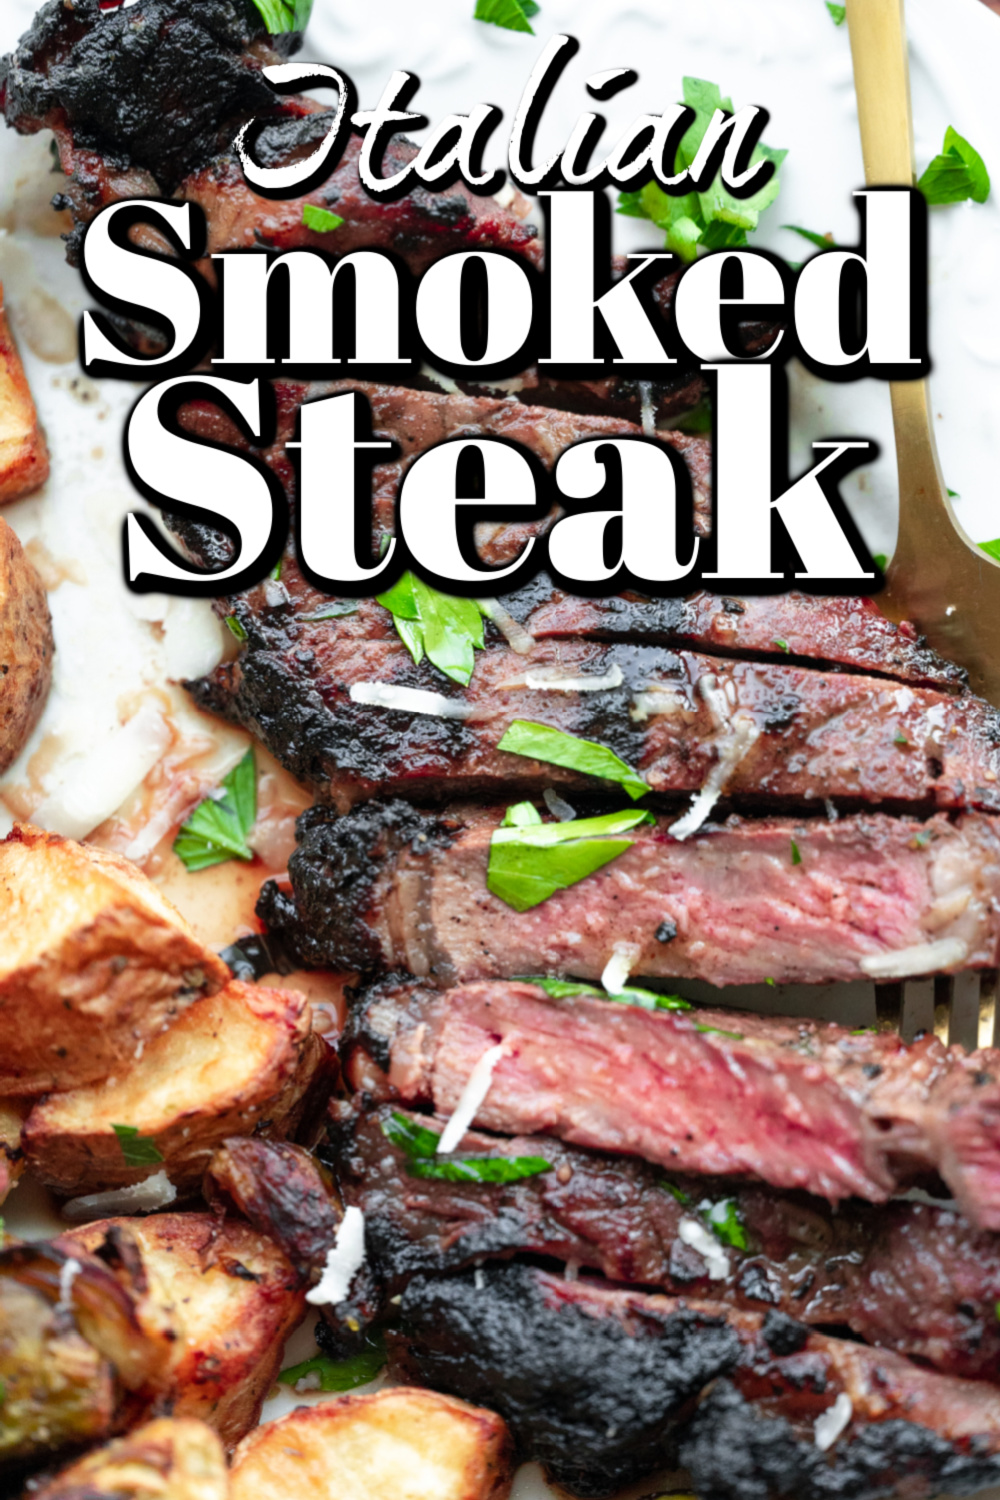 These Italian marinated smoke steaks are as easy to prepare as they are tasty. Perfect for an elegant dinner or a weeknight meal!